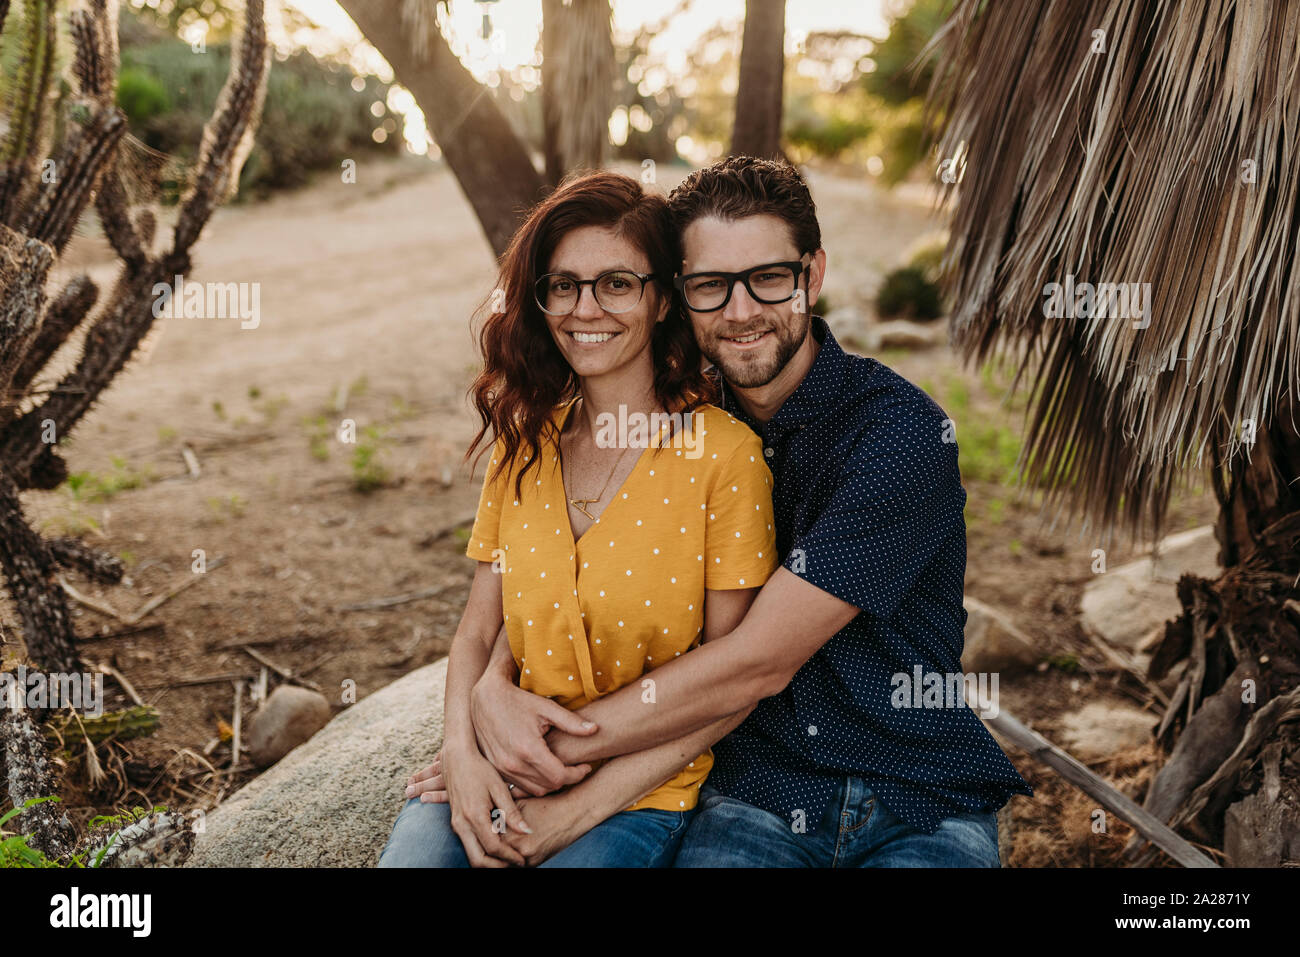 Young couple sitting on rock sourire en accolade fermer Banque D'Images